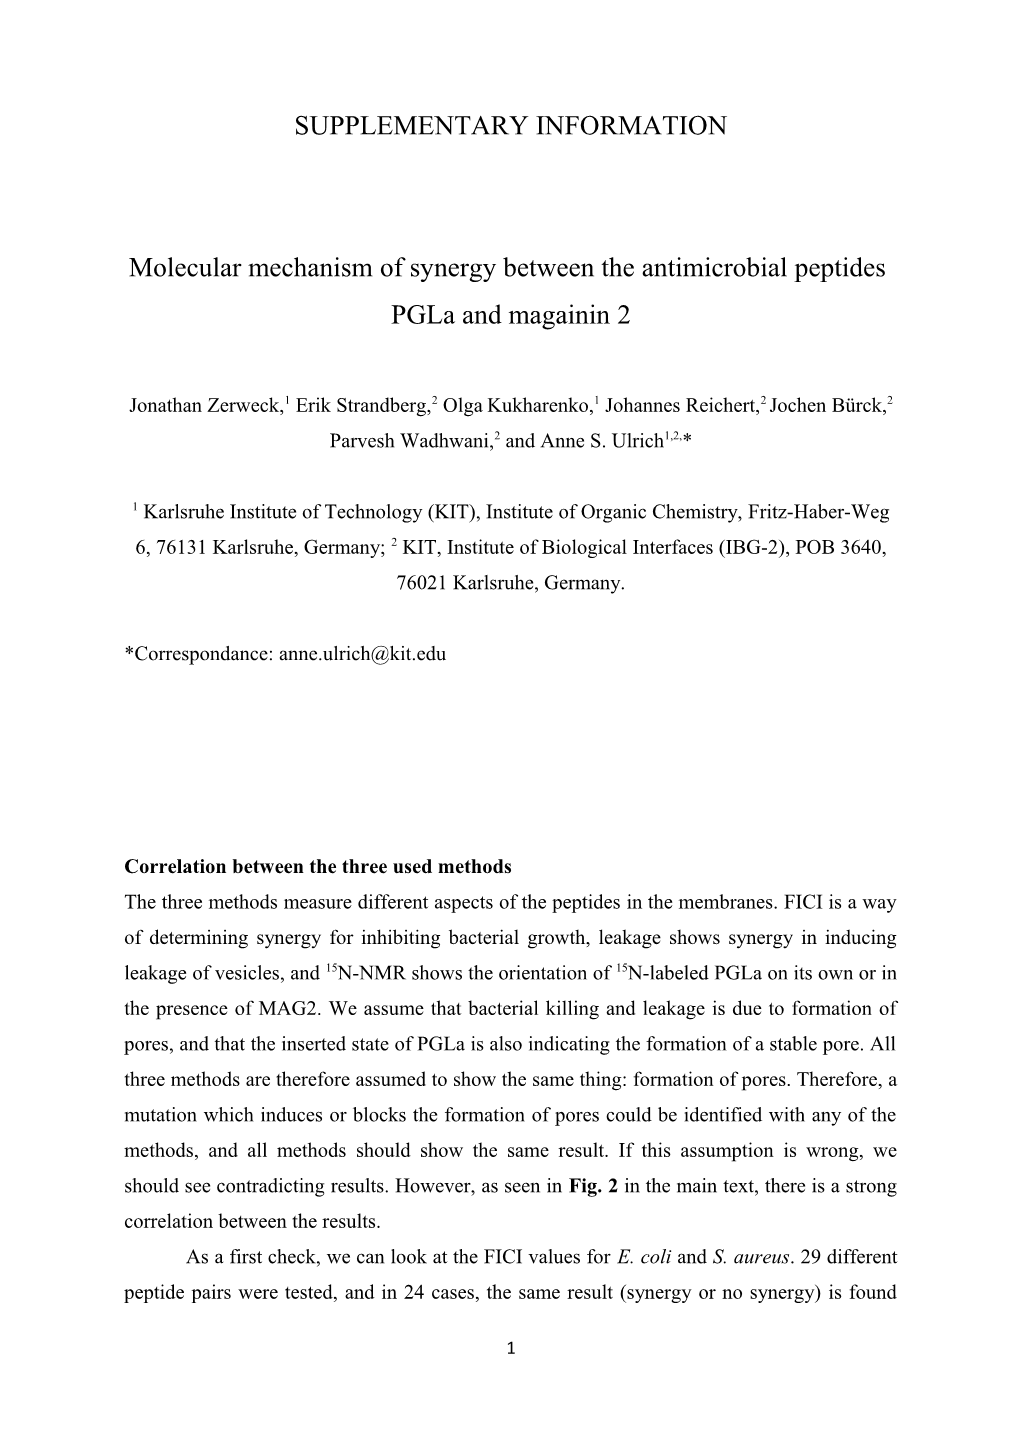 Molecular Mechanism of Synergy Between the Antimicrobial Peptides